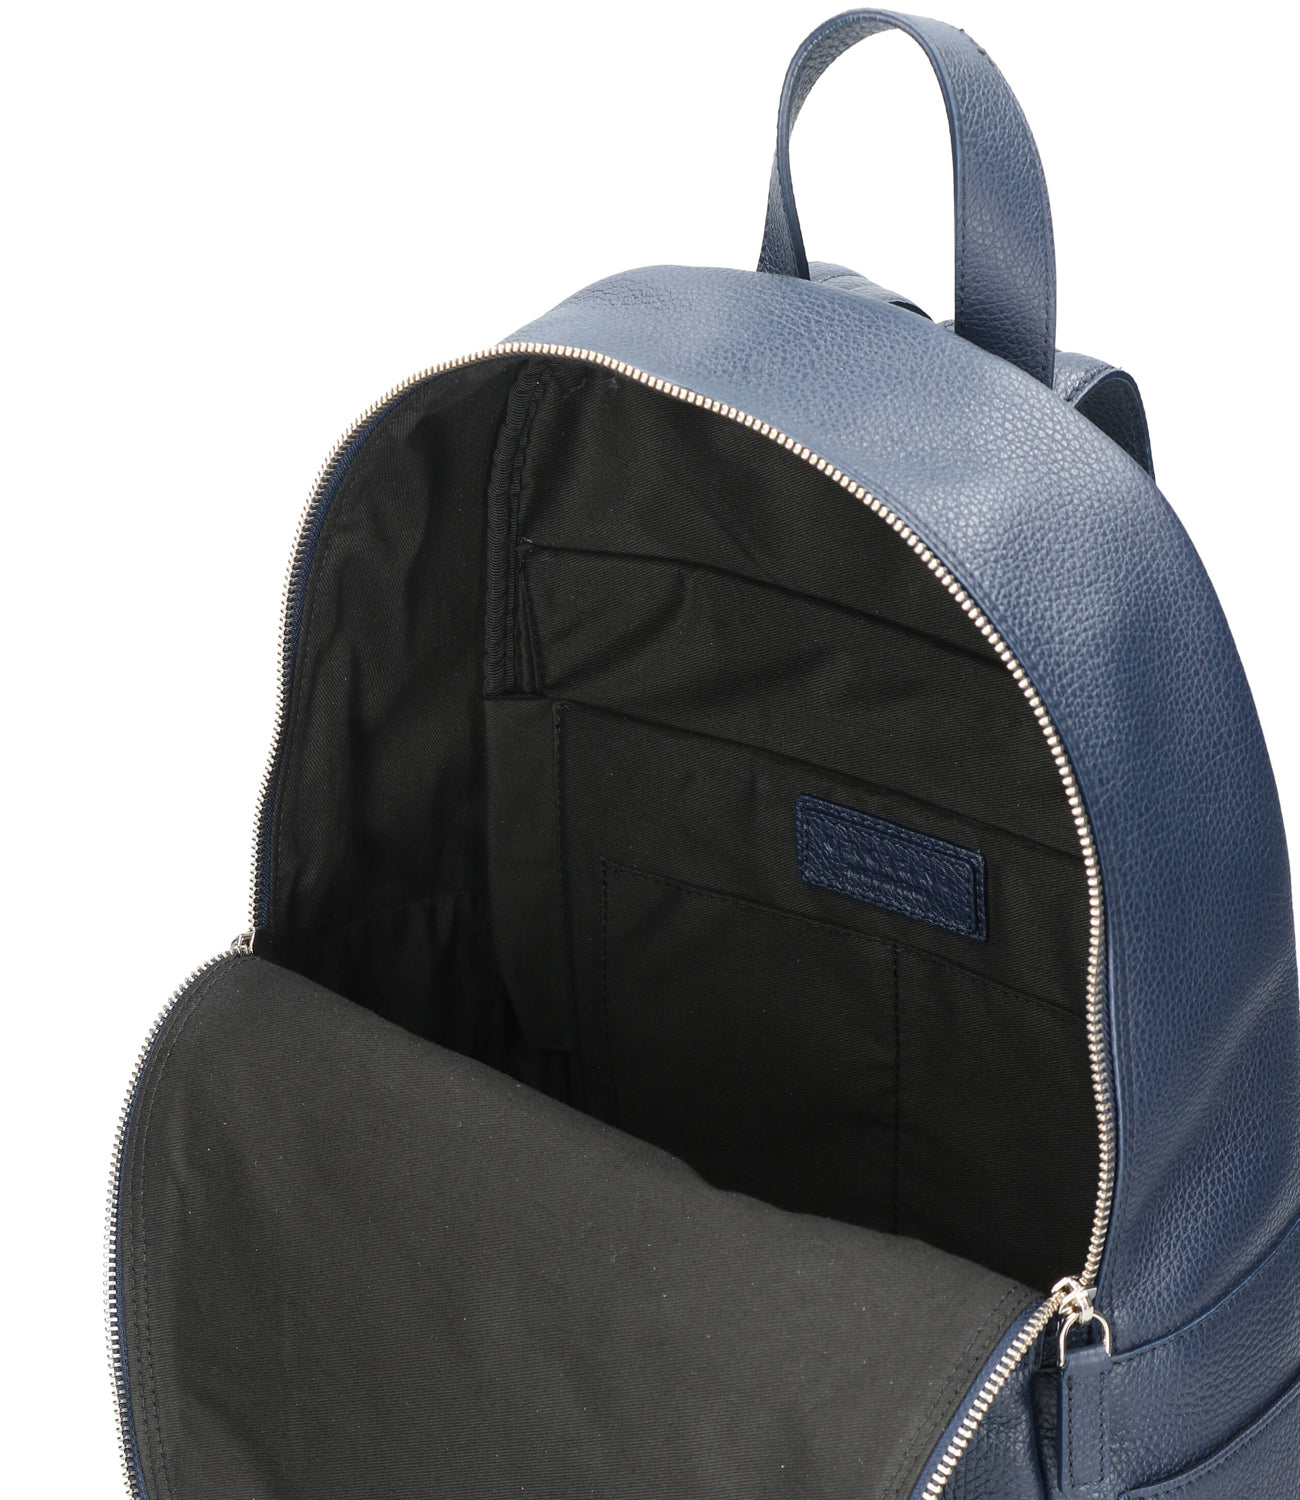 Orciani | Blue Backpack